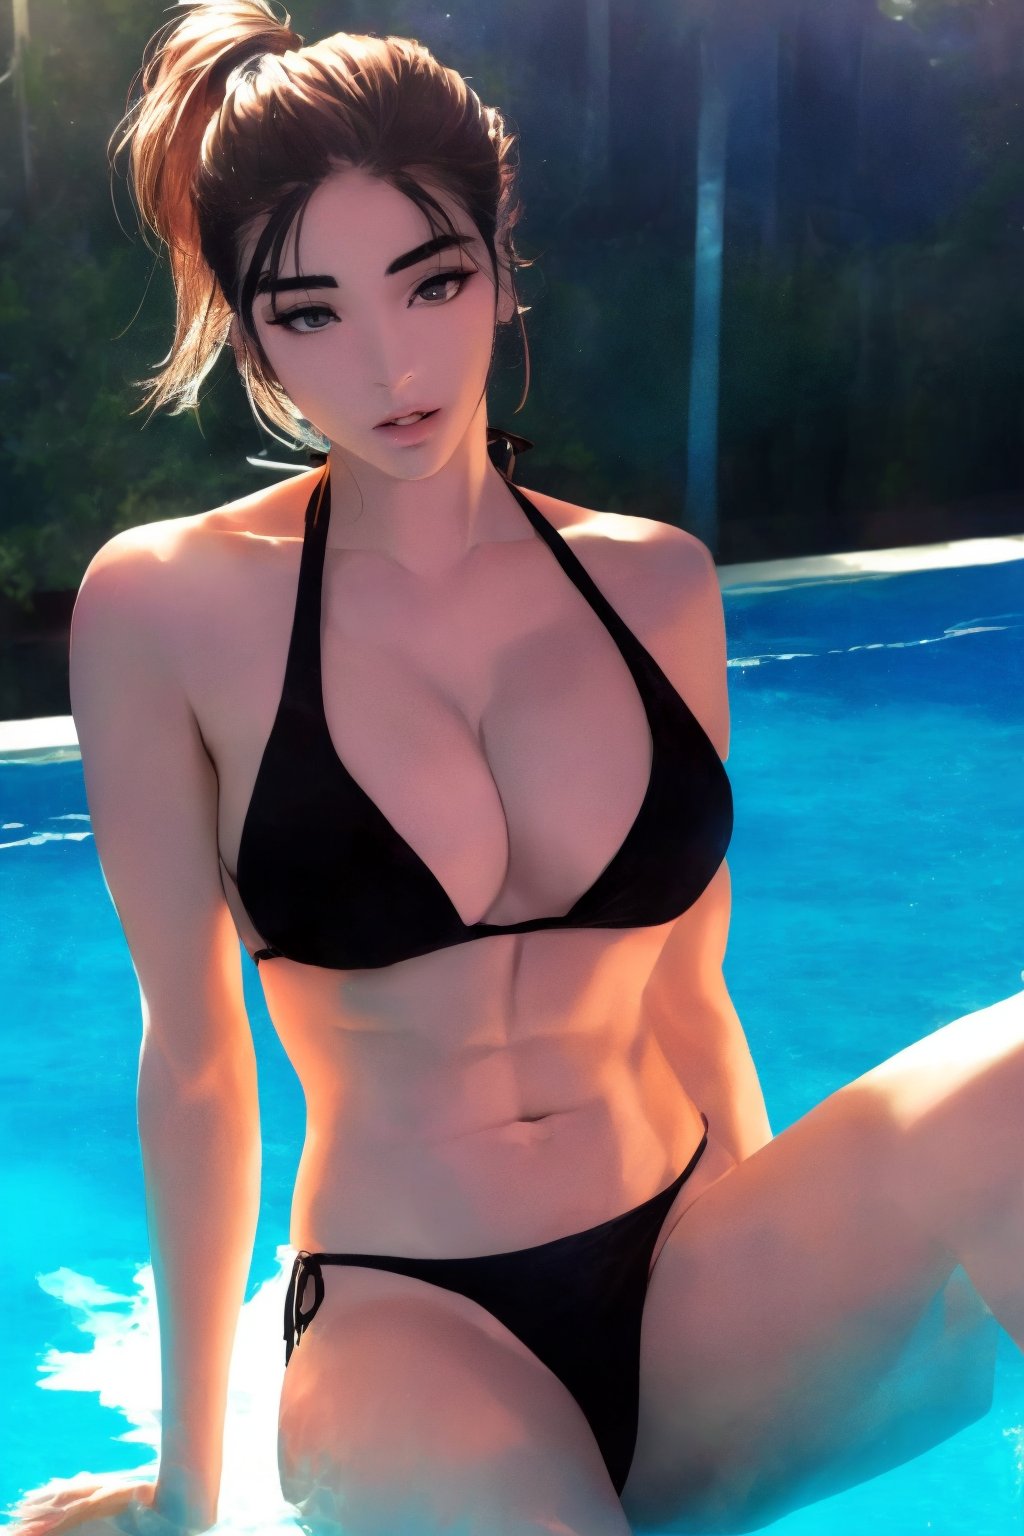 1girl, looking at viewer, thigh up body, kpop idol, styled outfit, on stage, professional lighting, different hairstyle, coloful,pool side,best quality, masterpiece,flat chest,transparent black bikini, sexy pose,sexy,